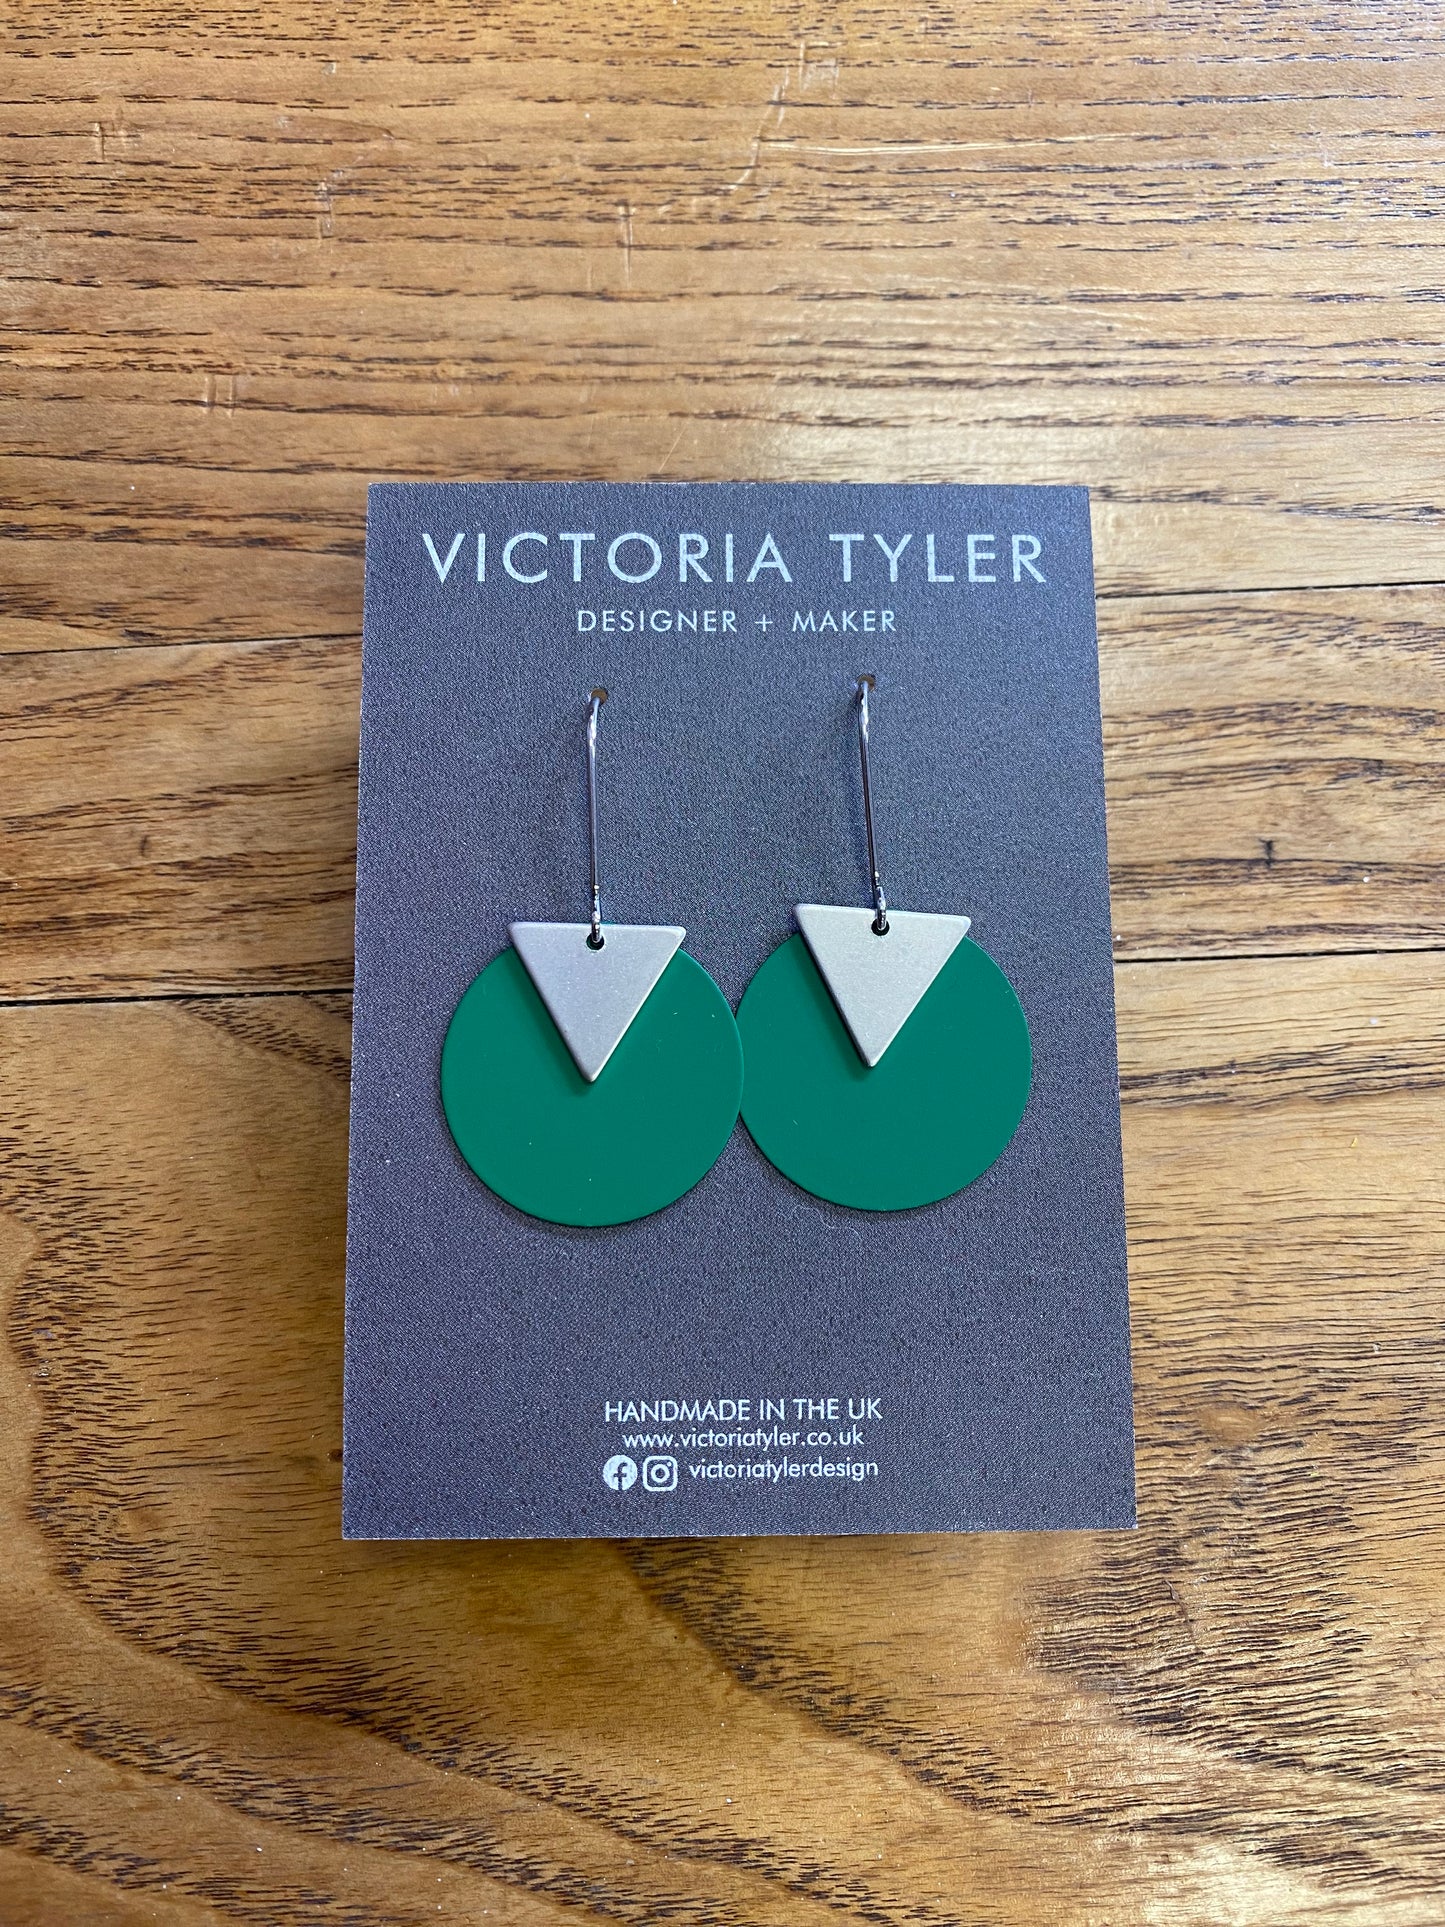 Green Circle Dangly Earrings with Silver Plate Triangles - 'Kiki'. On a black backing card which says 'Victoria Tyler, Designer + Maker